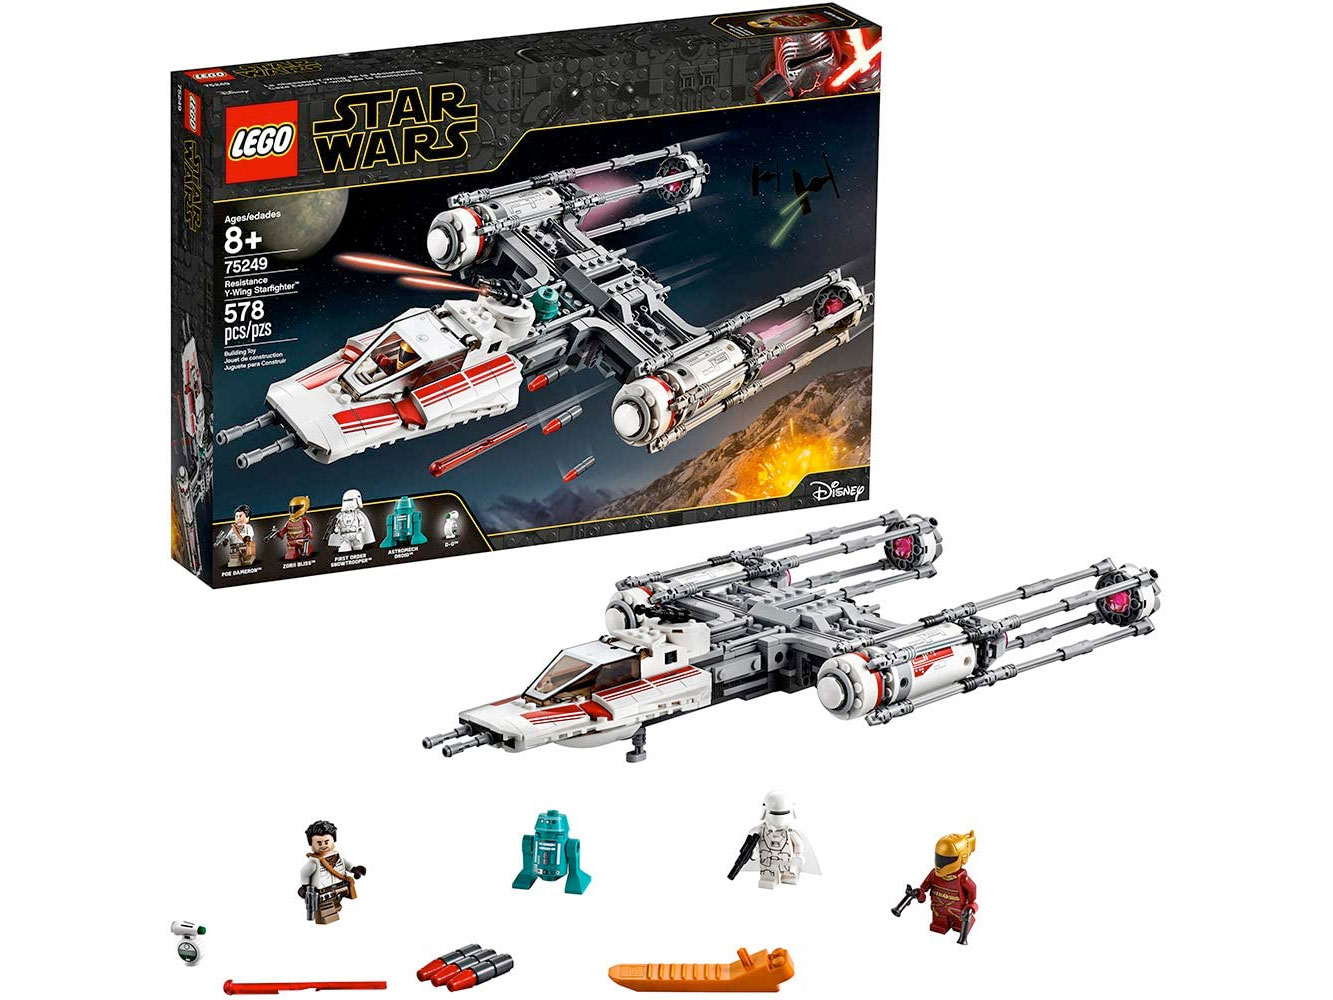 Amazon：LEGO Star Wars: The Rise of Skywalker Resistance Y-Wing Starfighter 75249 (578 pcs)只賣$62.96